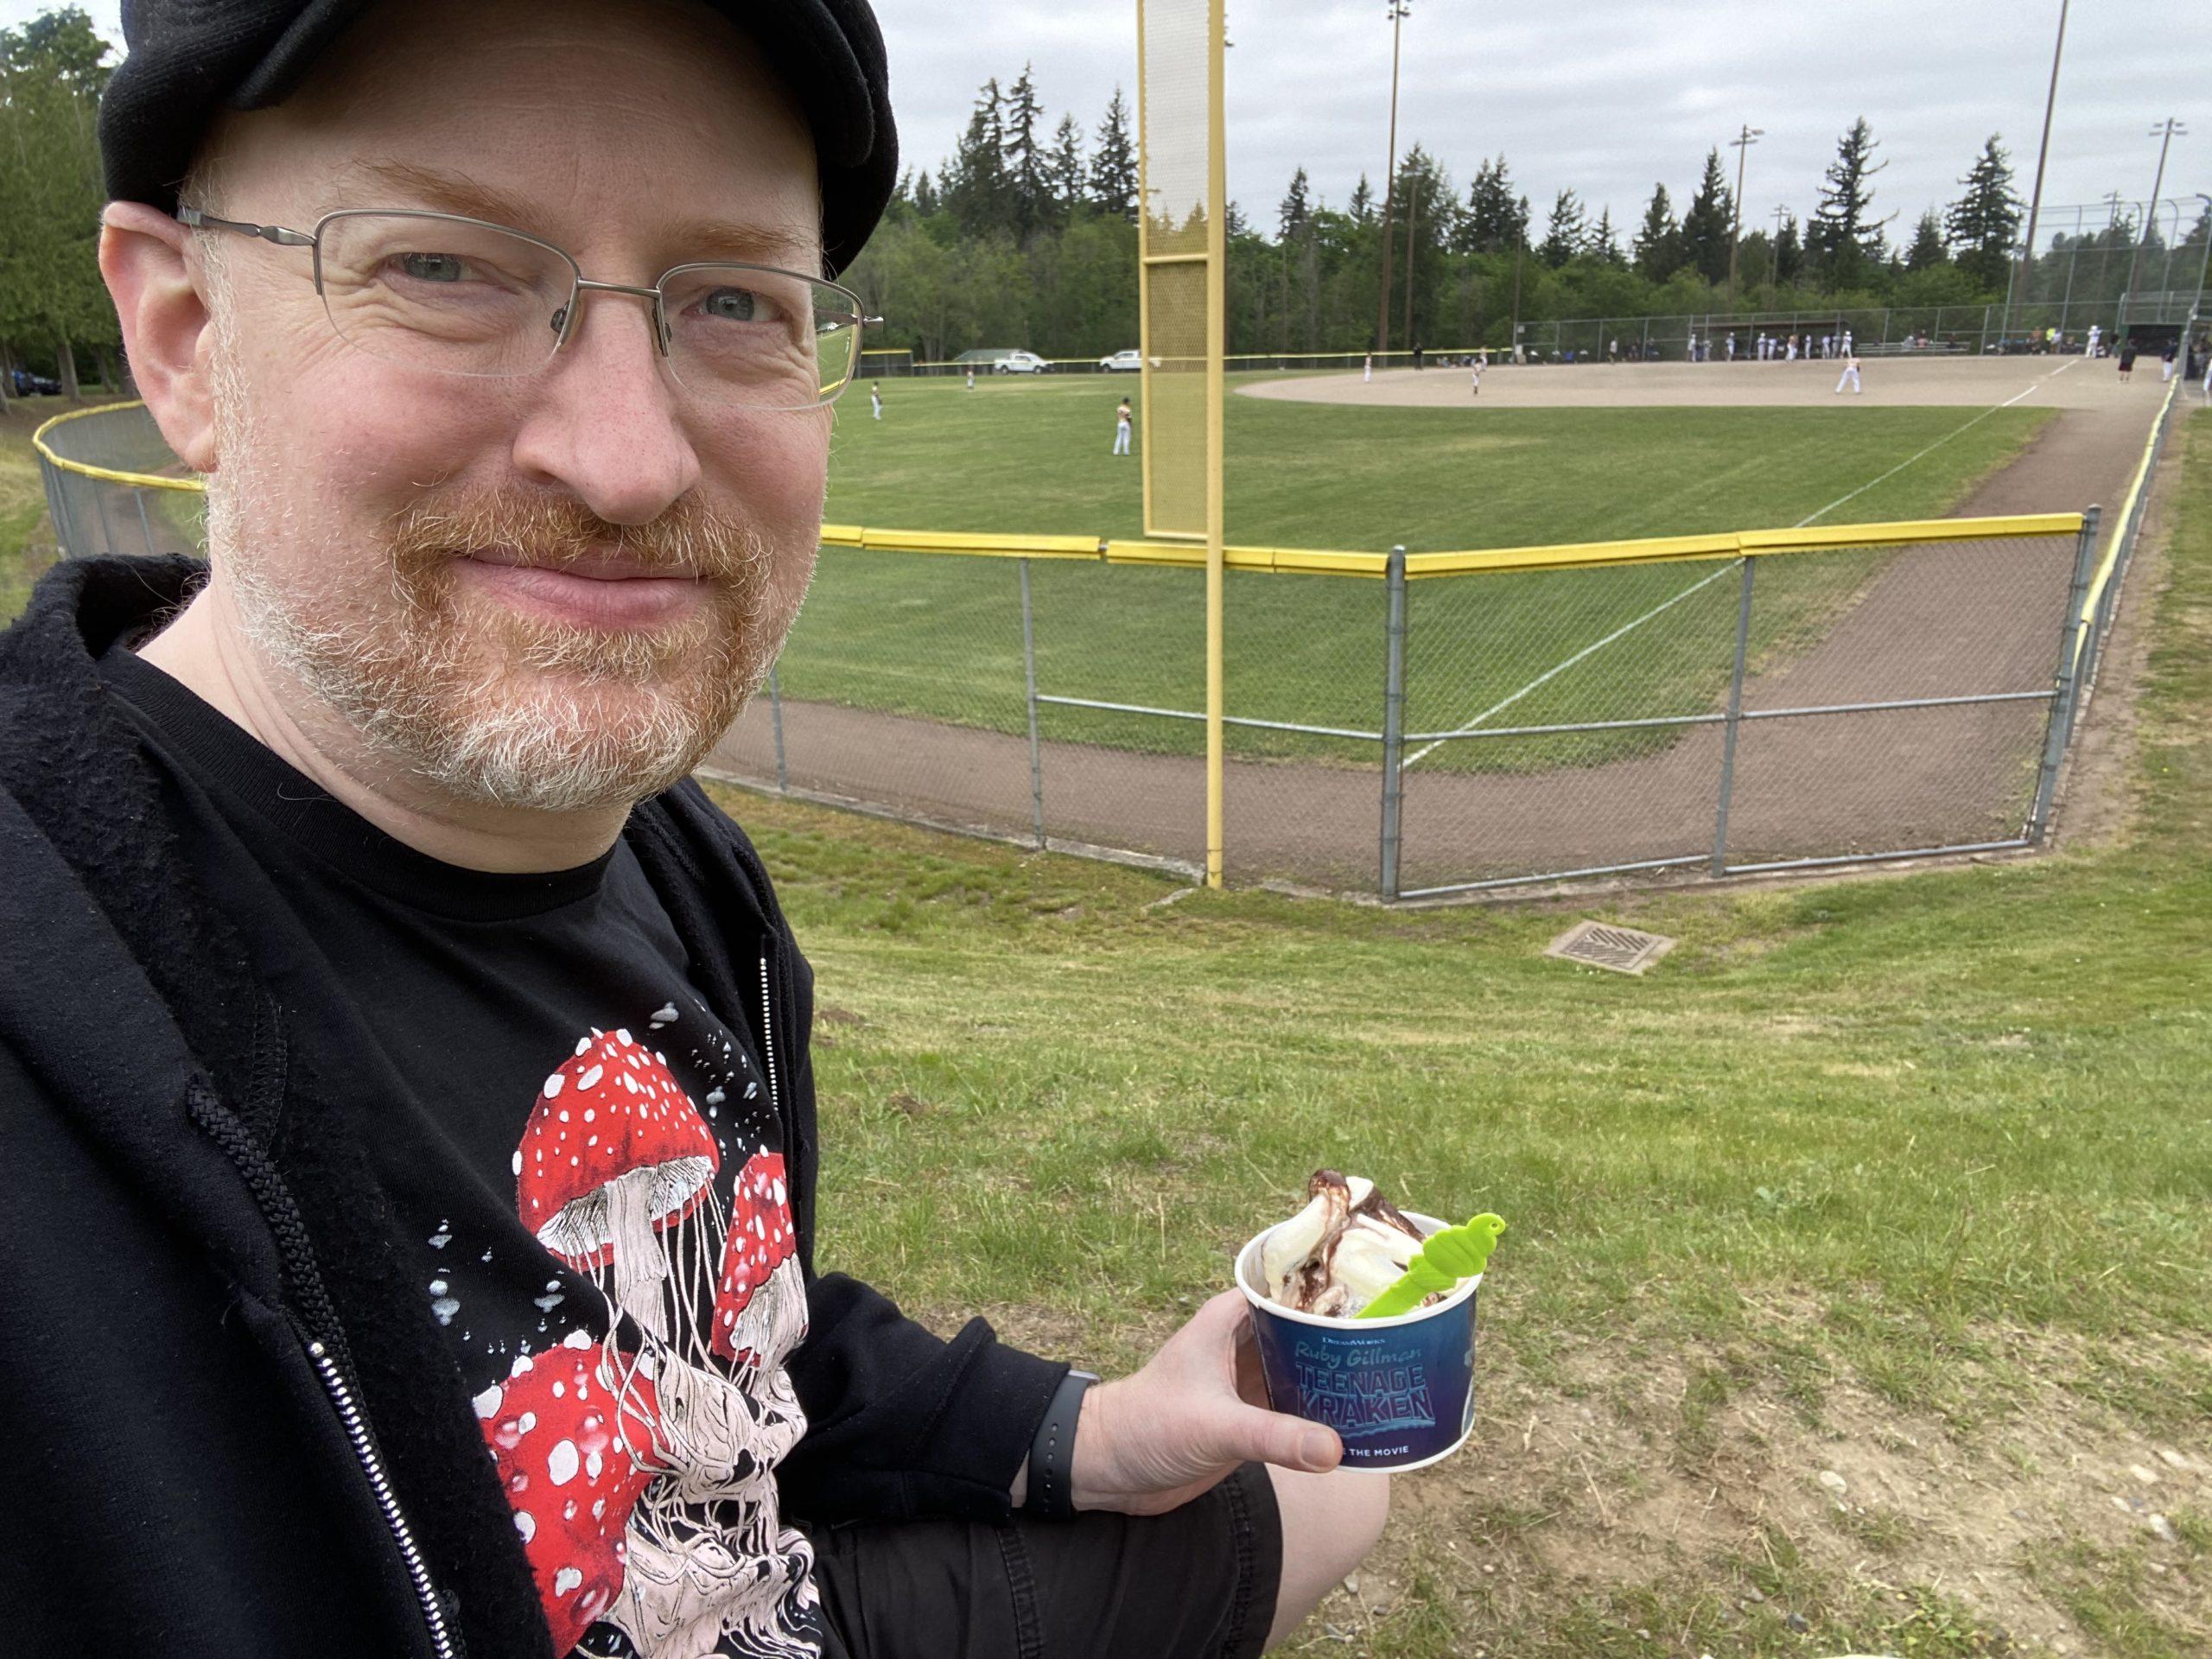 Me sitting outside the fence of a community park baseball diamond, with players visible in the distance. I'm holding a cup of frozen yogurt.